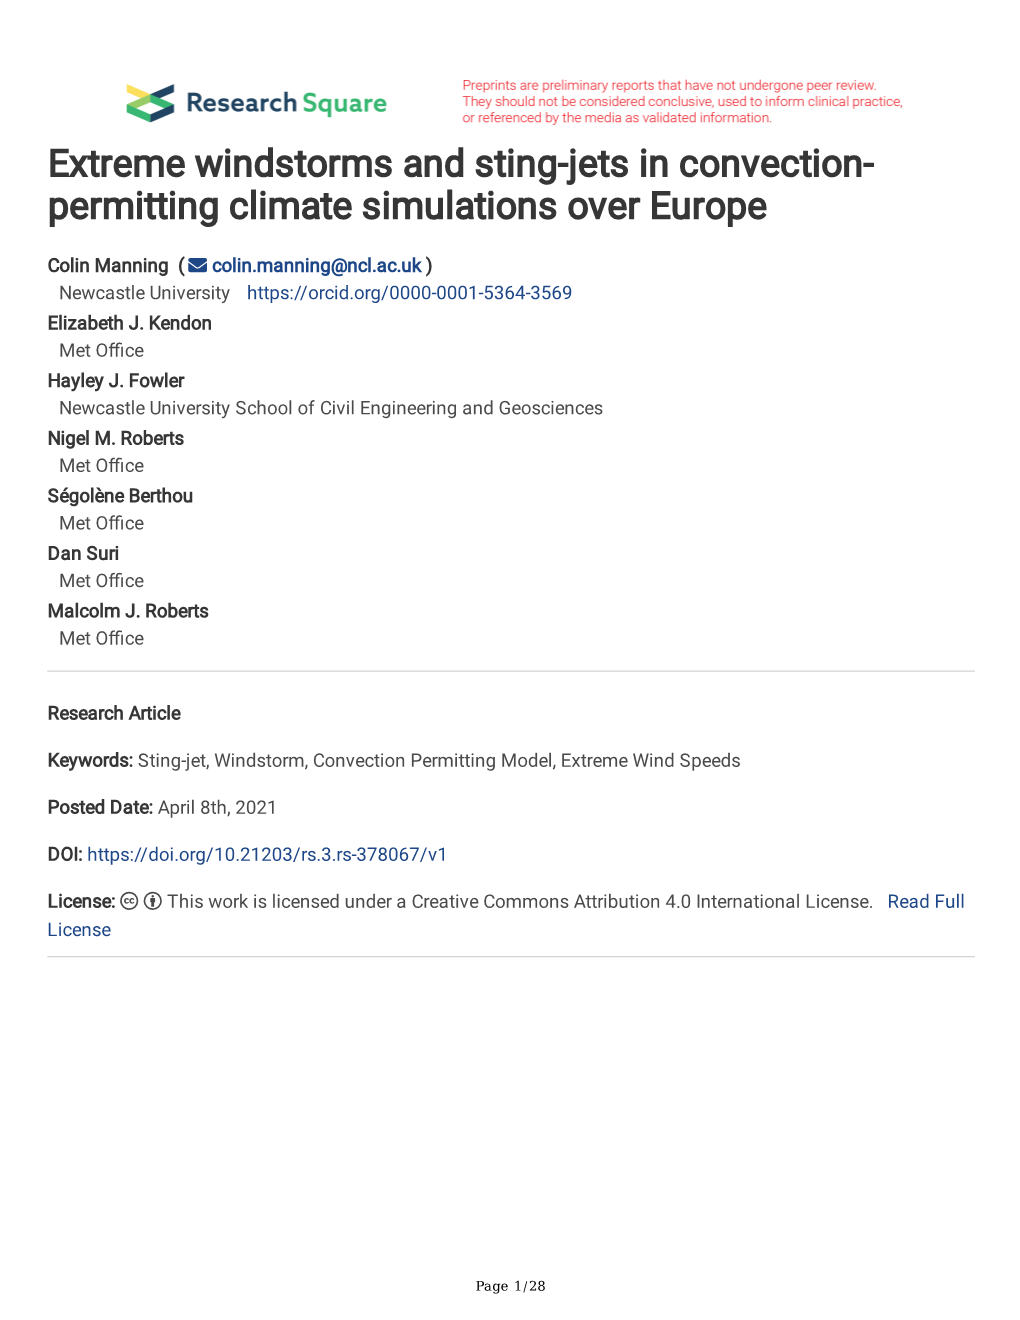 Extreme Windstorms and Sting-Jets in Convection- Permitting Climate Simulations Over Europe